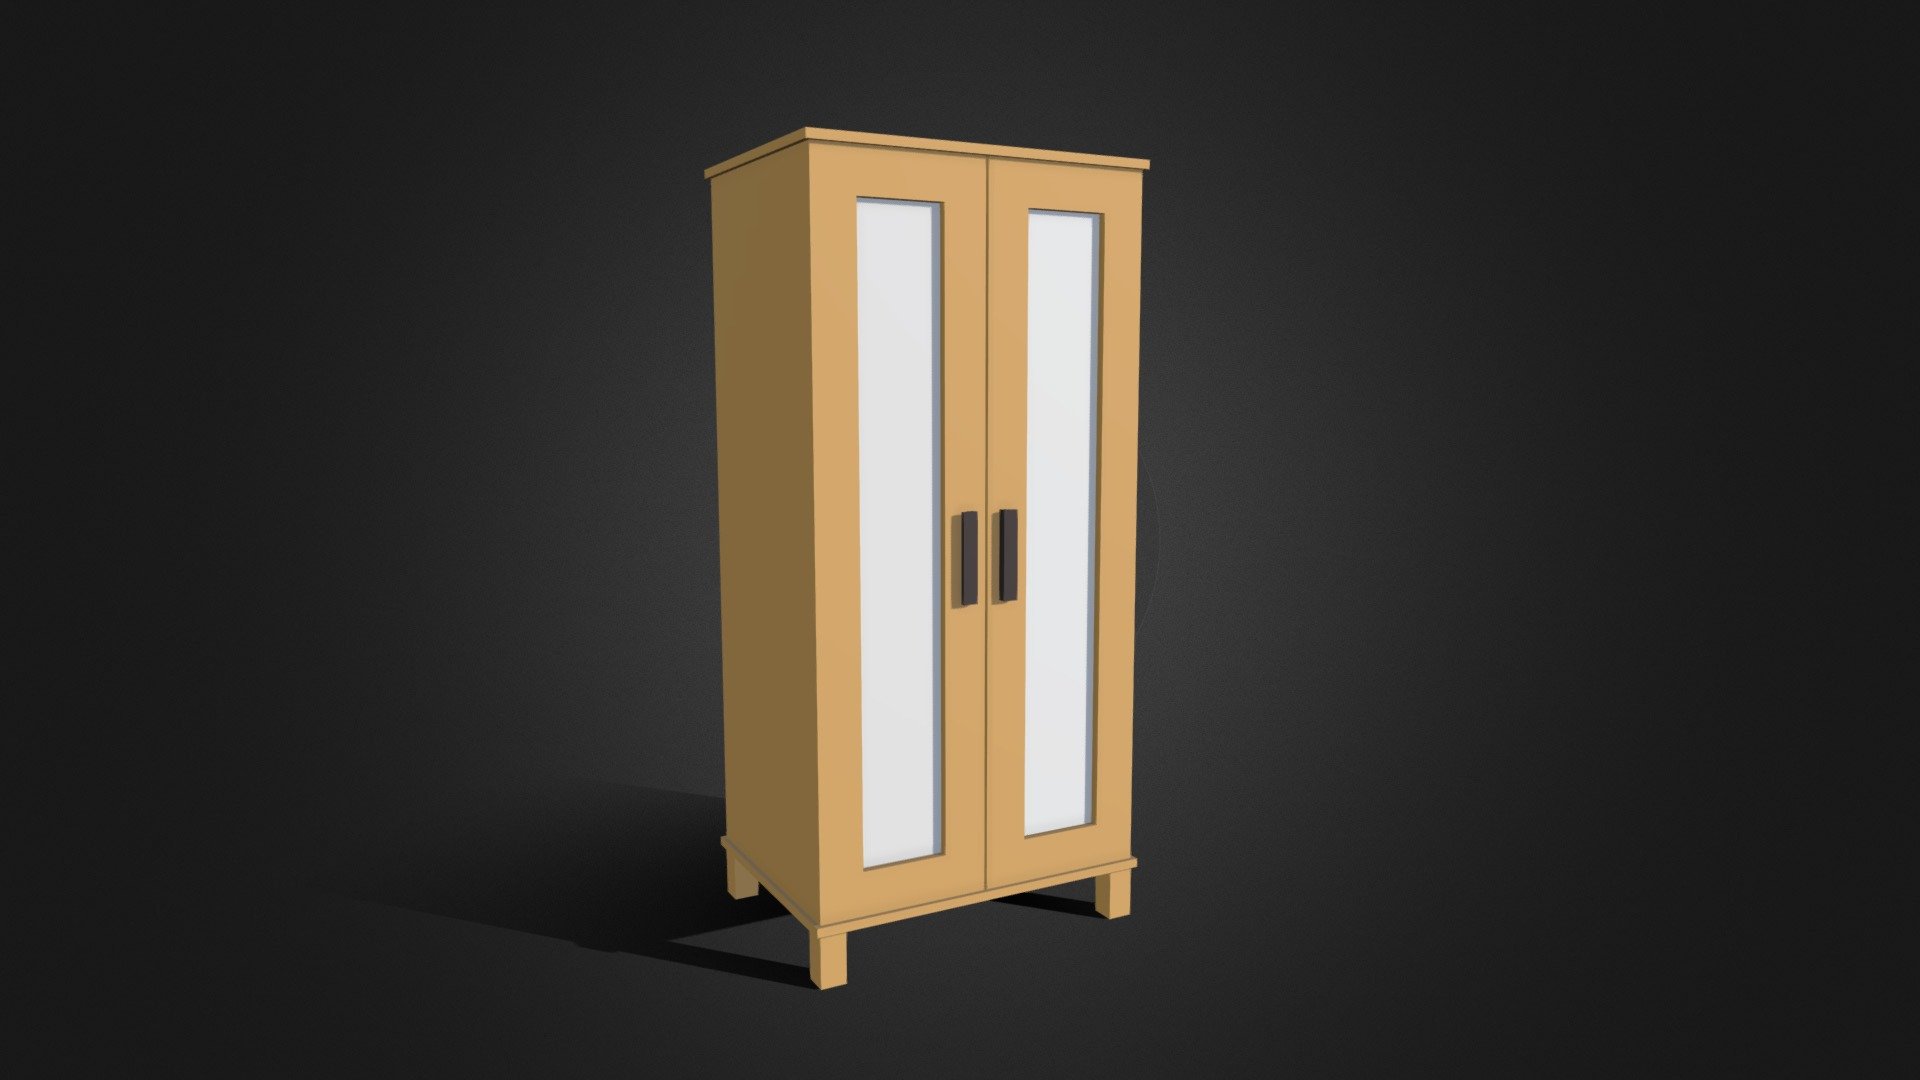 An IKEA wardrobe - I'm building simple props to paint in 3D-Coat and develop my skills in the software 3d model